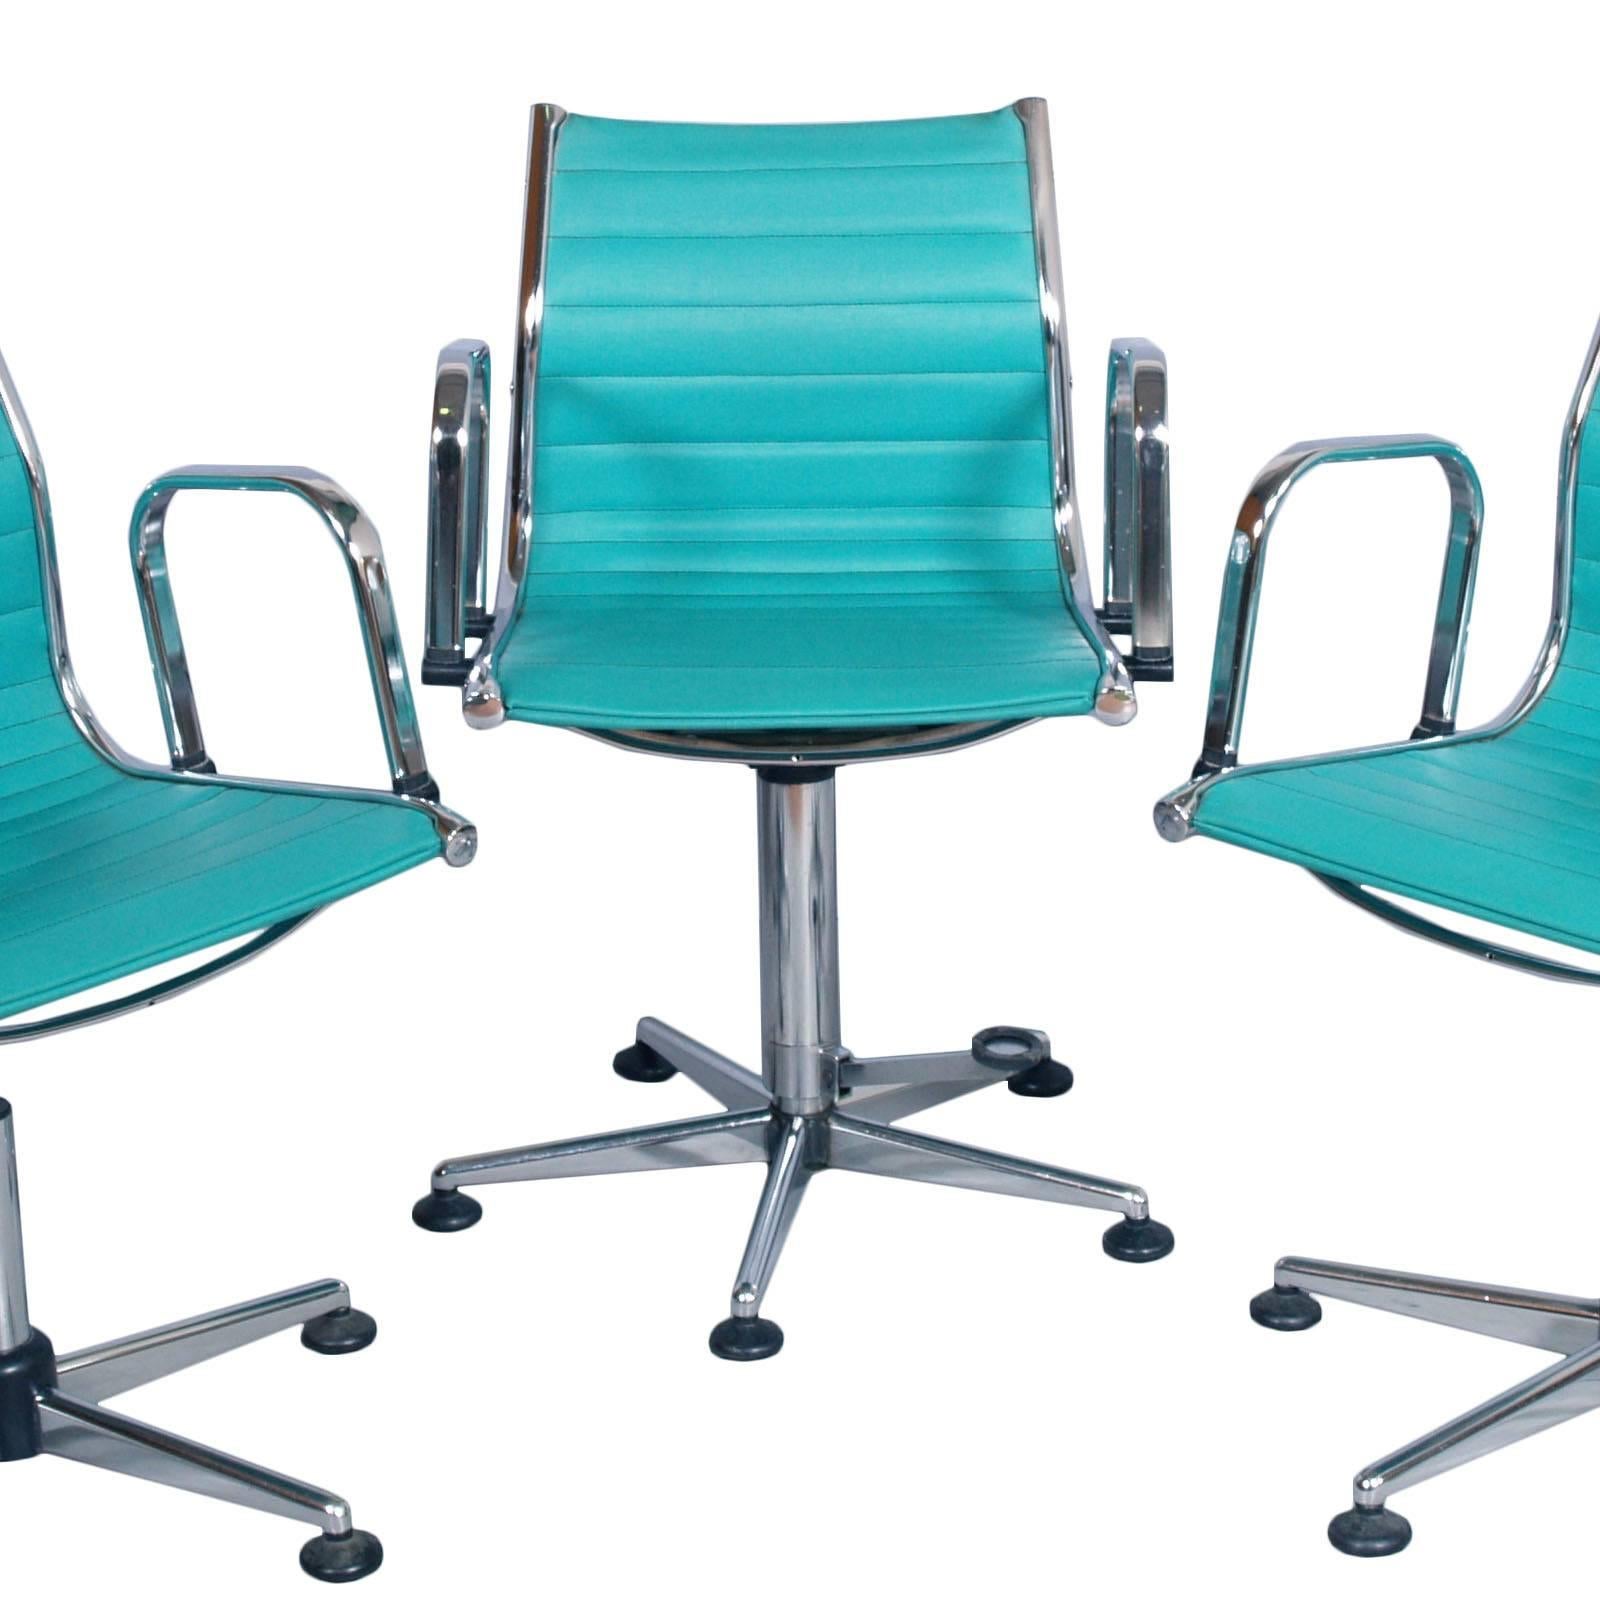 Italian set of 1960s desk chairs, chromed steel. Upholstered turquoise leatherette , two revolving chairs and one revolving with adjustable height by gas-plunger. Good condition
Measure of the two revolving chairs cm: H50/90 W58 D50.
Measure the one